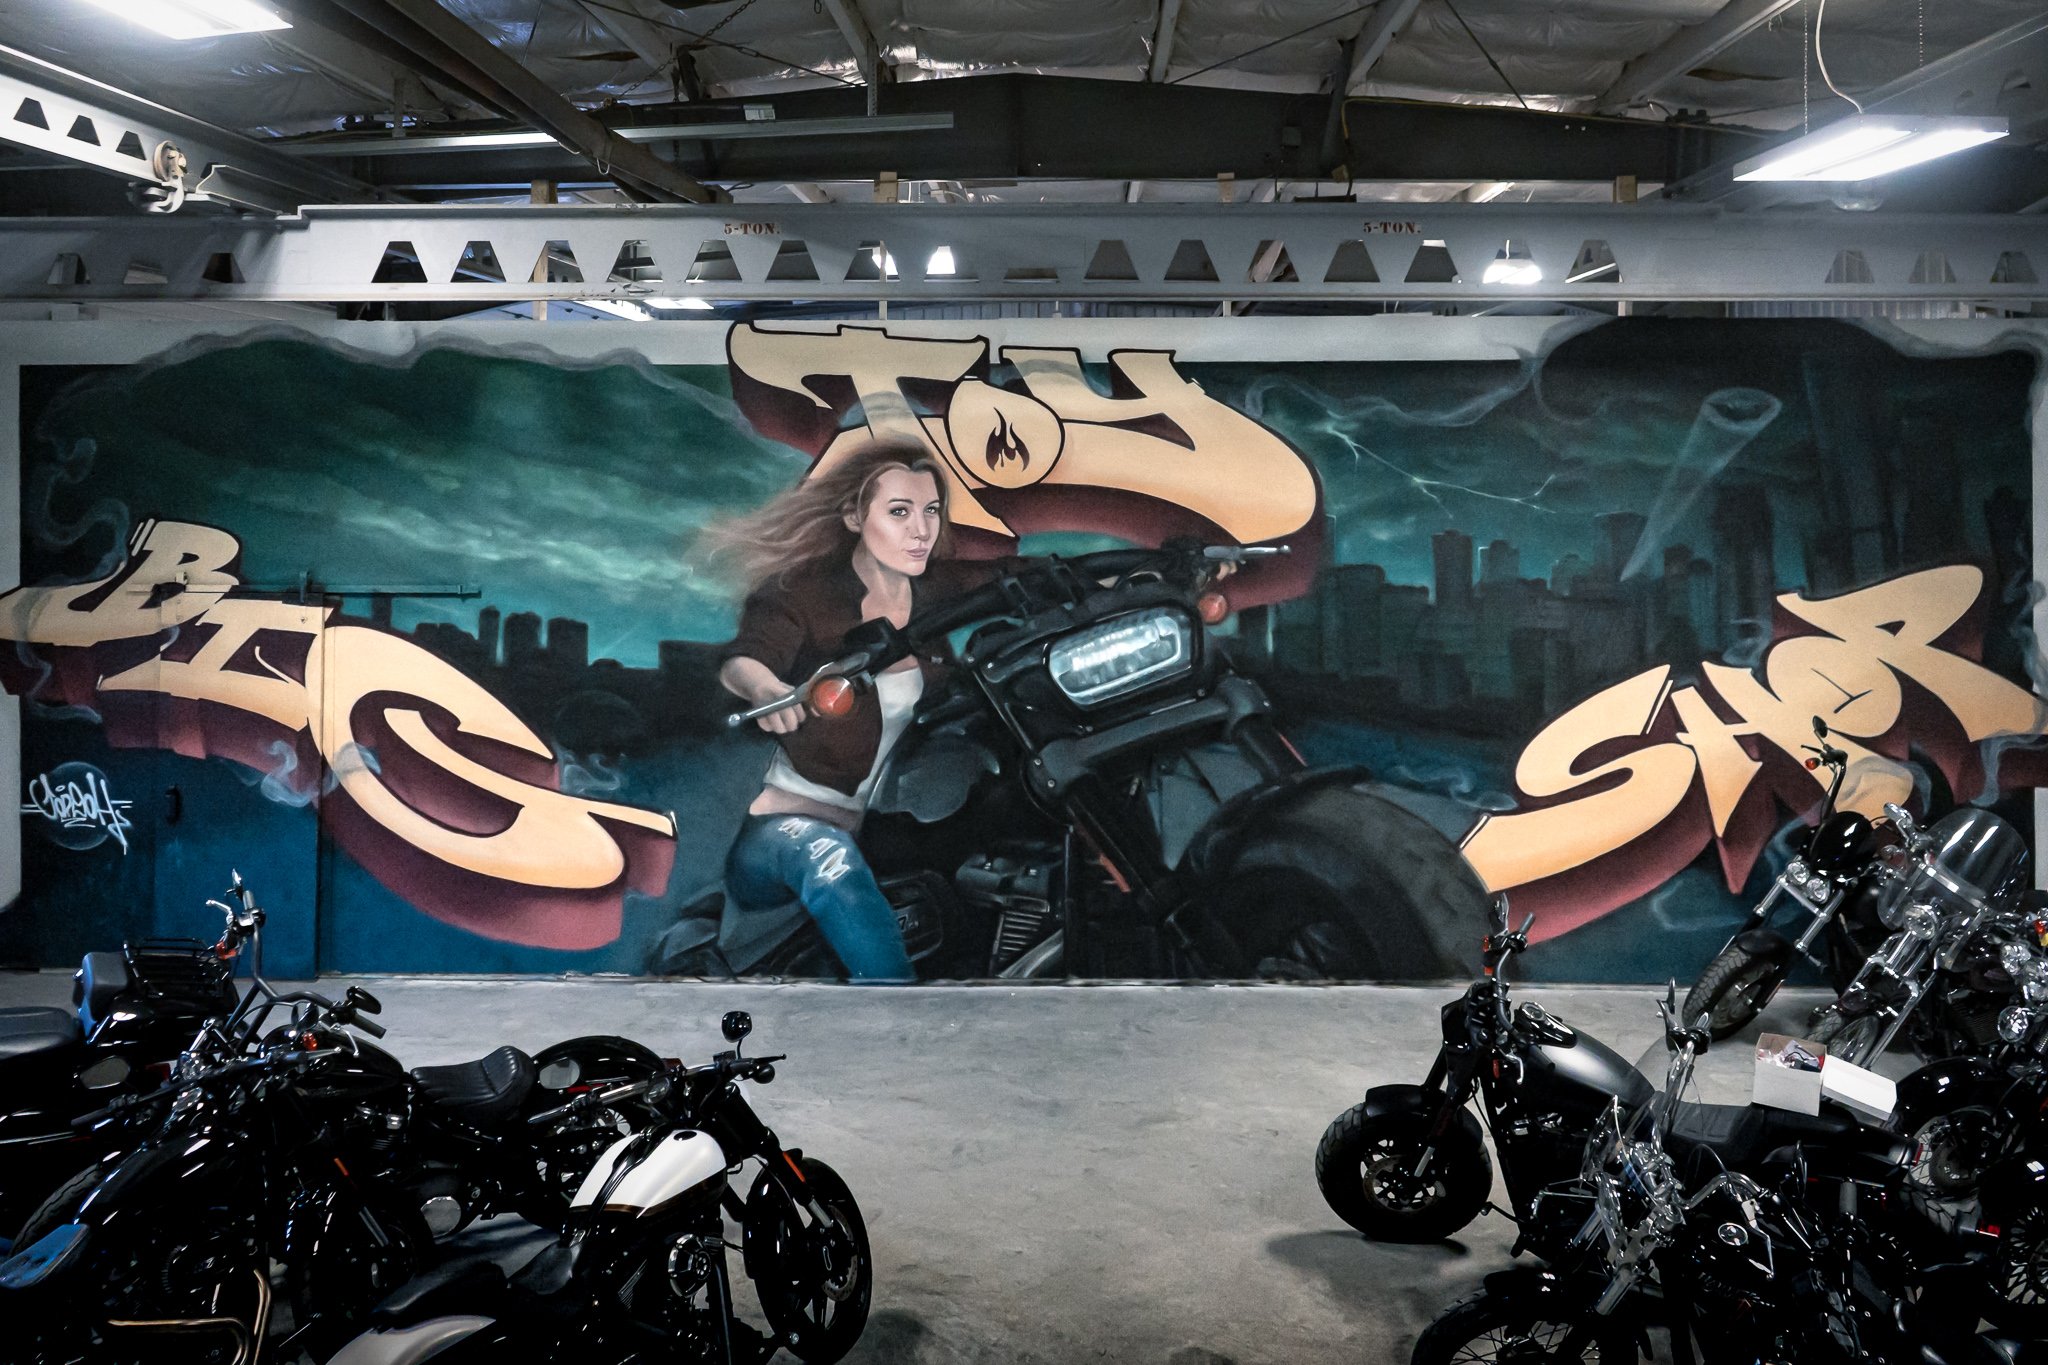 High Detail - Blake Lively Riding a Harley